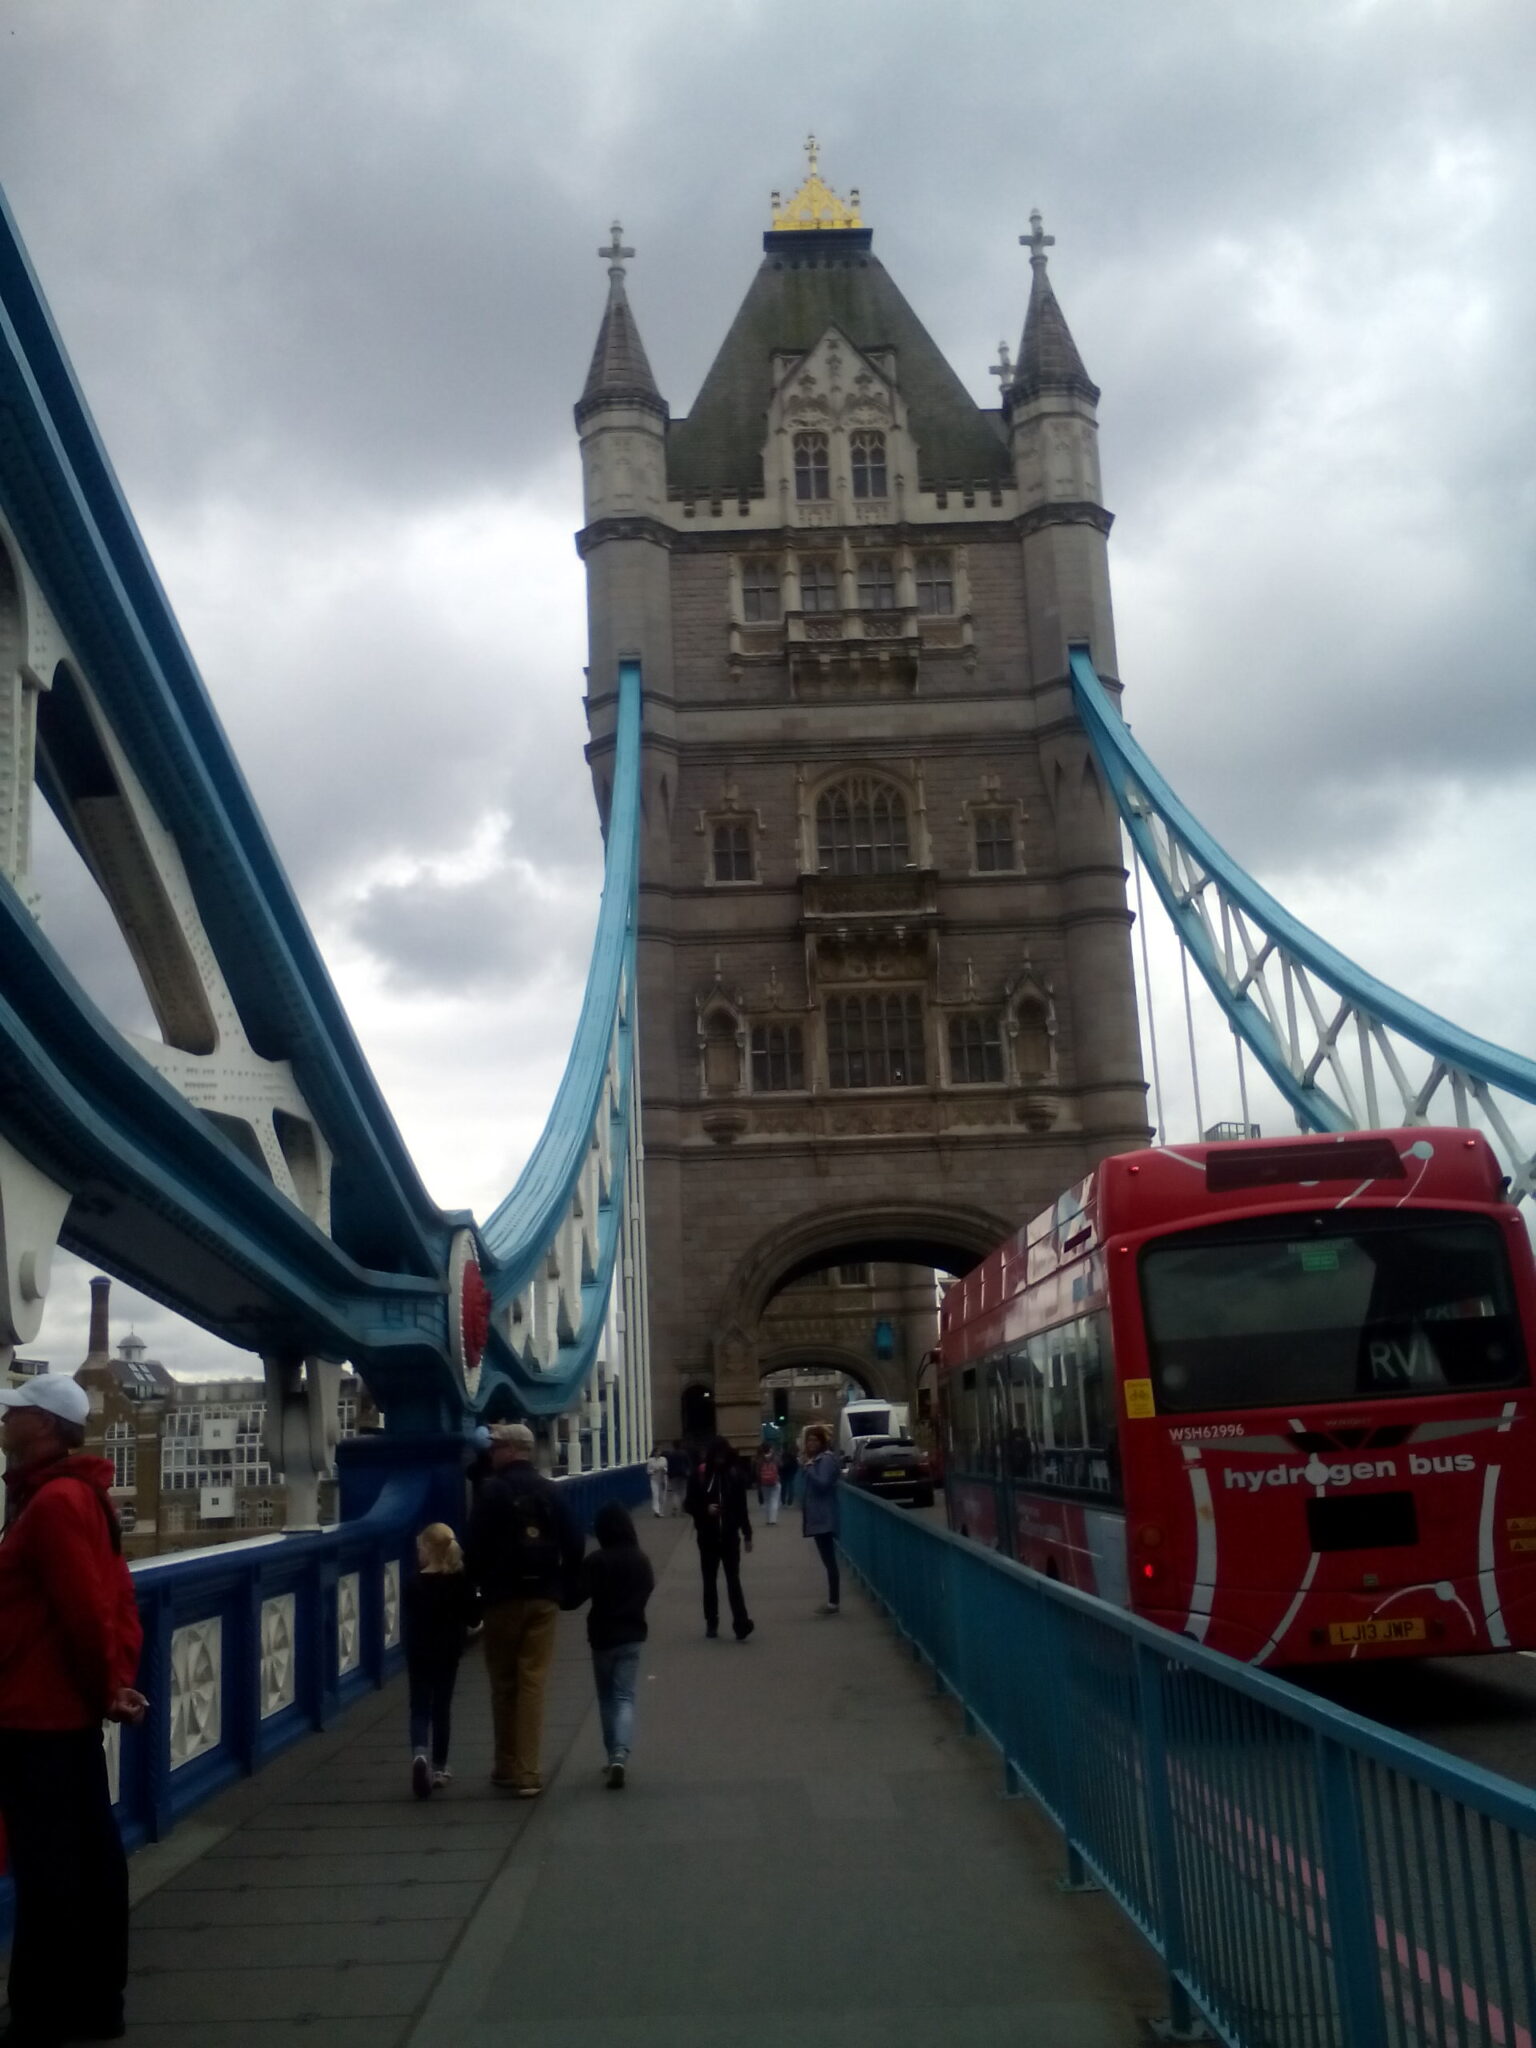 Walking on the Tower Bridge while watching one of its enormous tower.